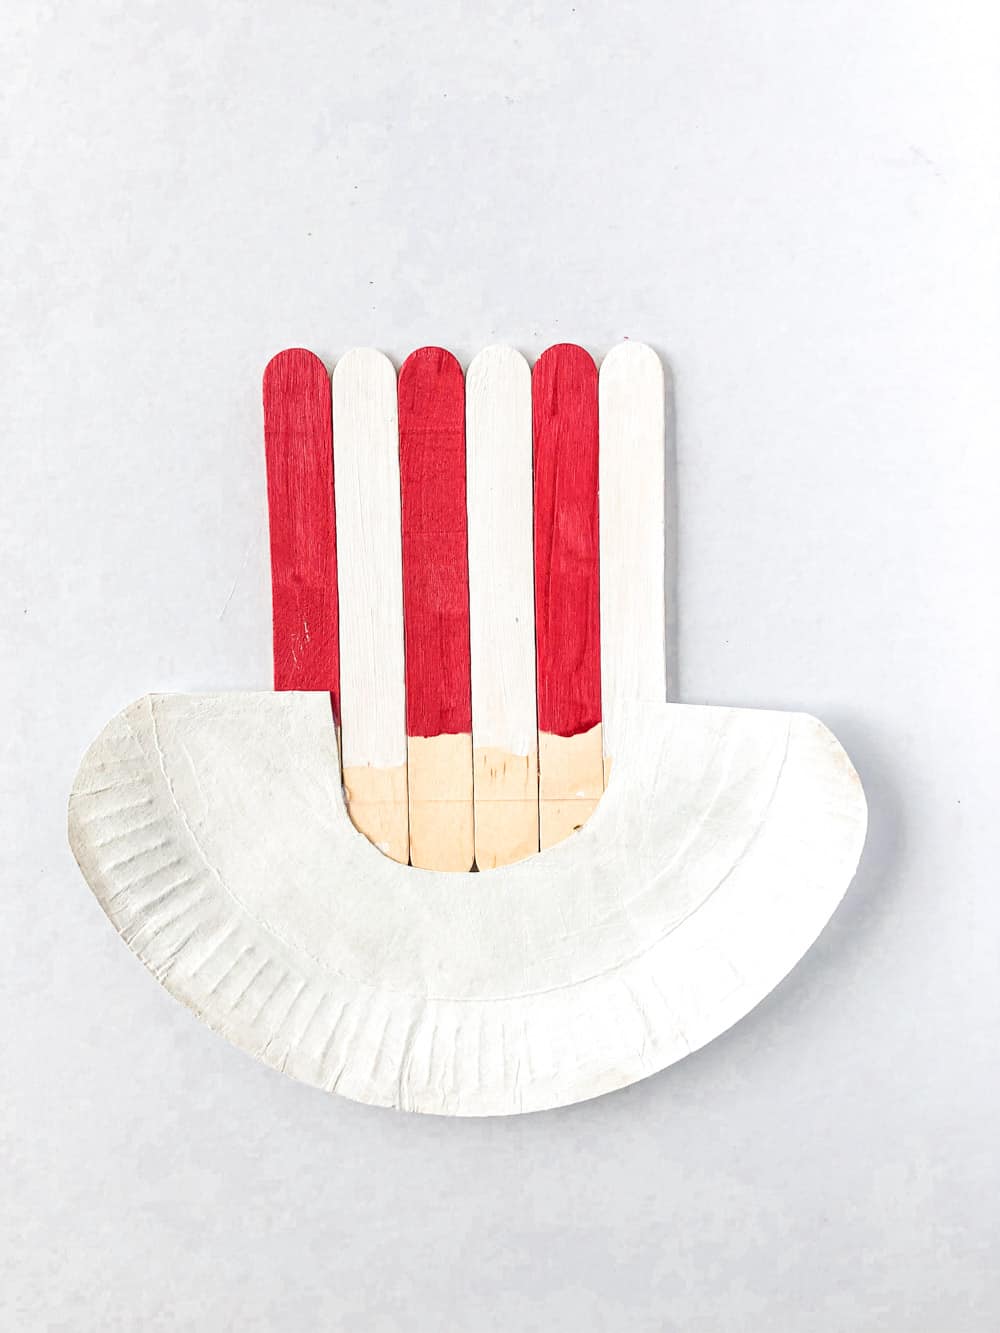 Align them together, the popsicle sticks above, the blue popsicles in the middle and the paper plate below them, and glue them using the glue gun.